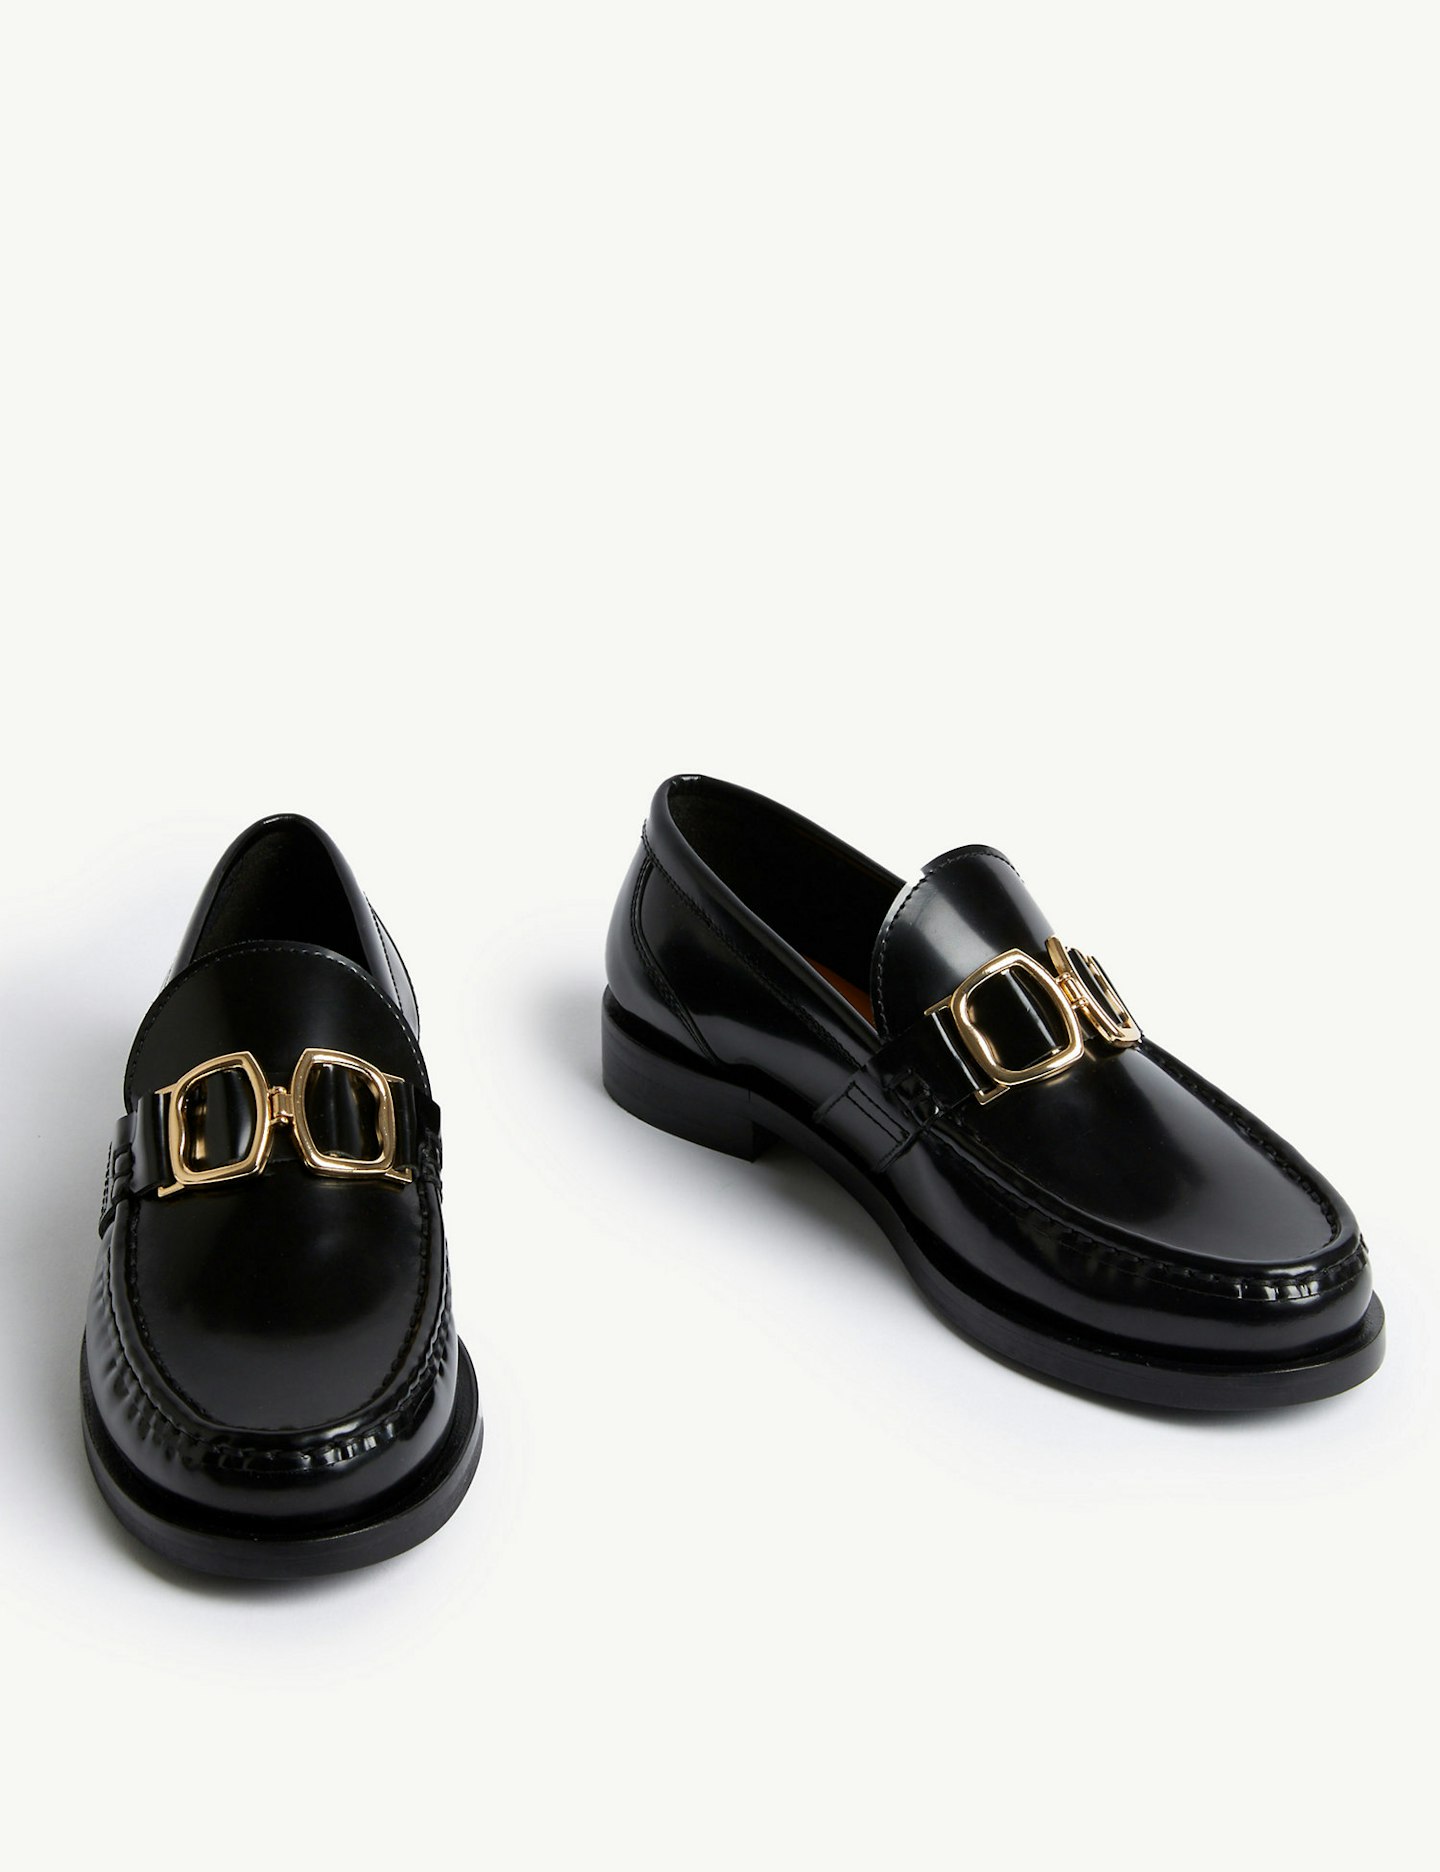 Sienna Miller M&S loafers 